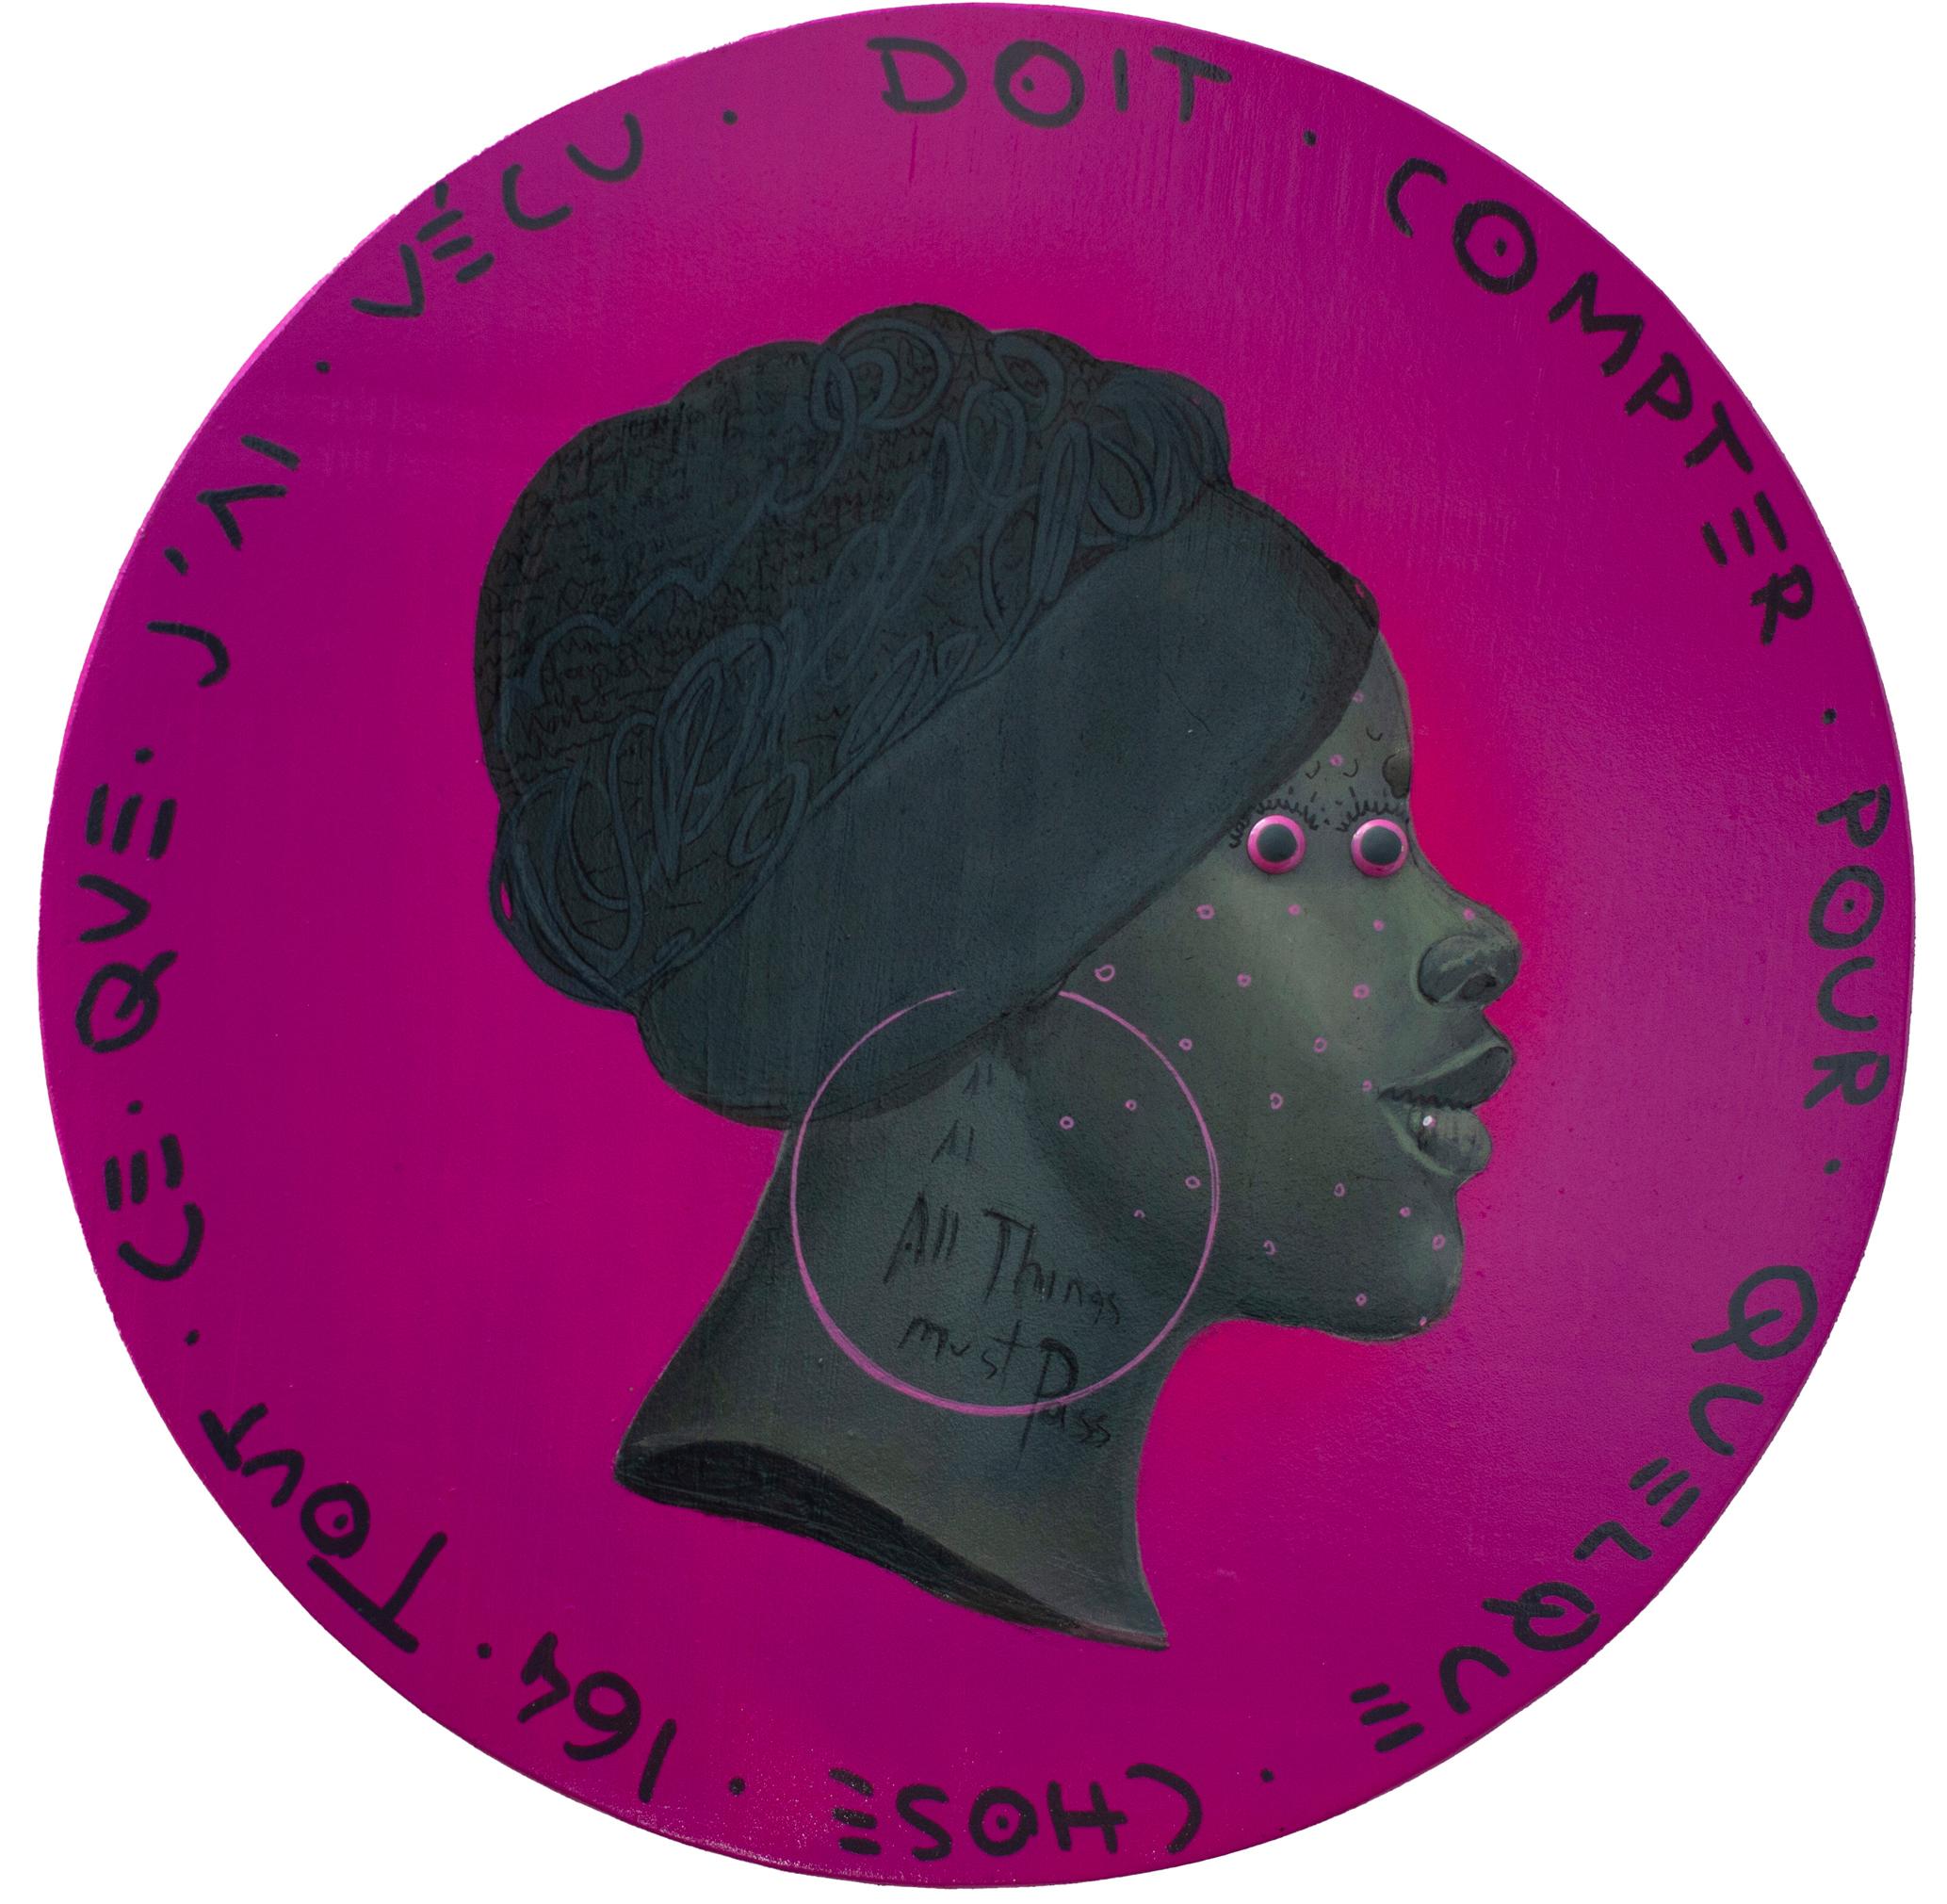 Contemporary Vibrant Profile of a Black Woman. French Phrase "Currency #223"